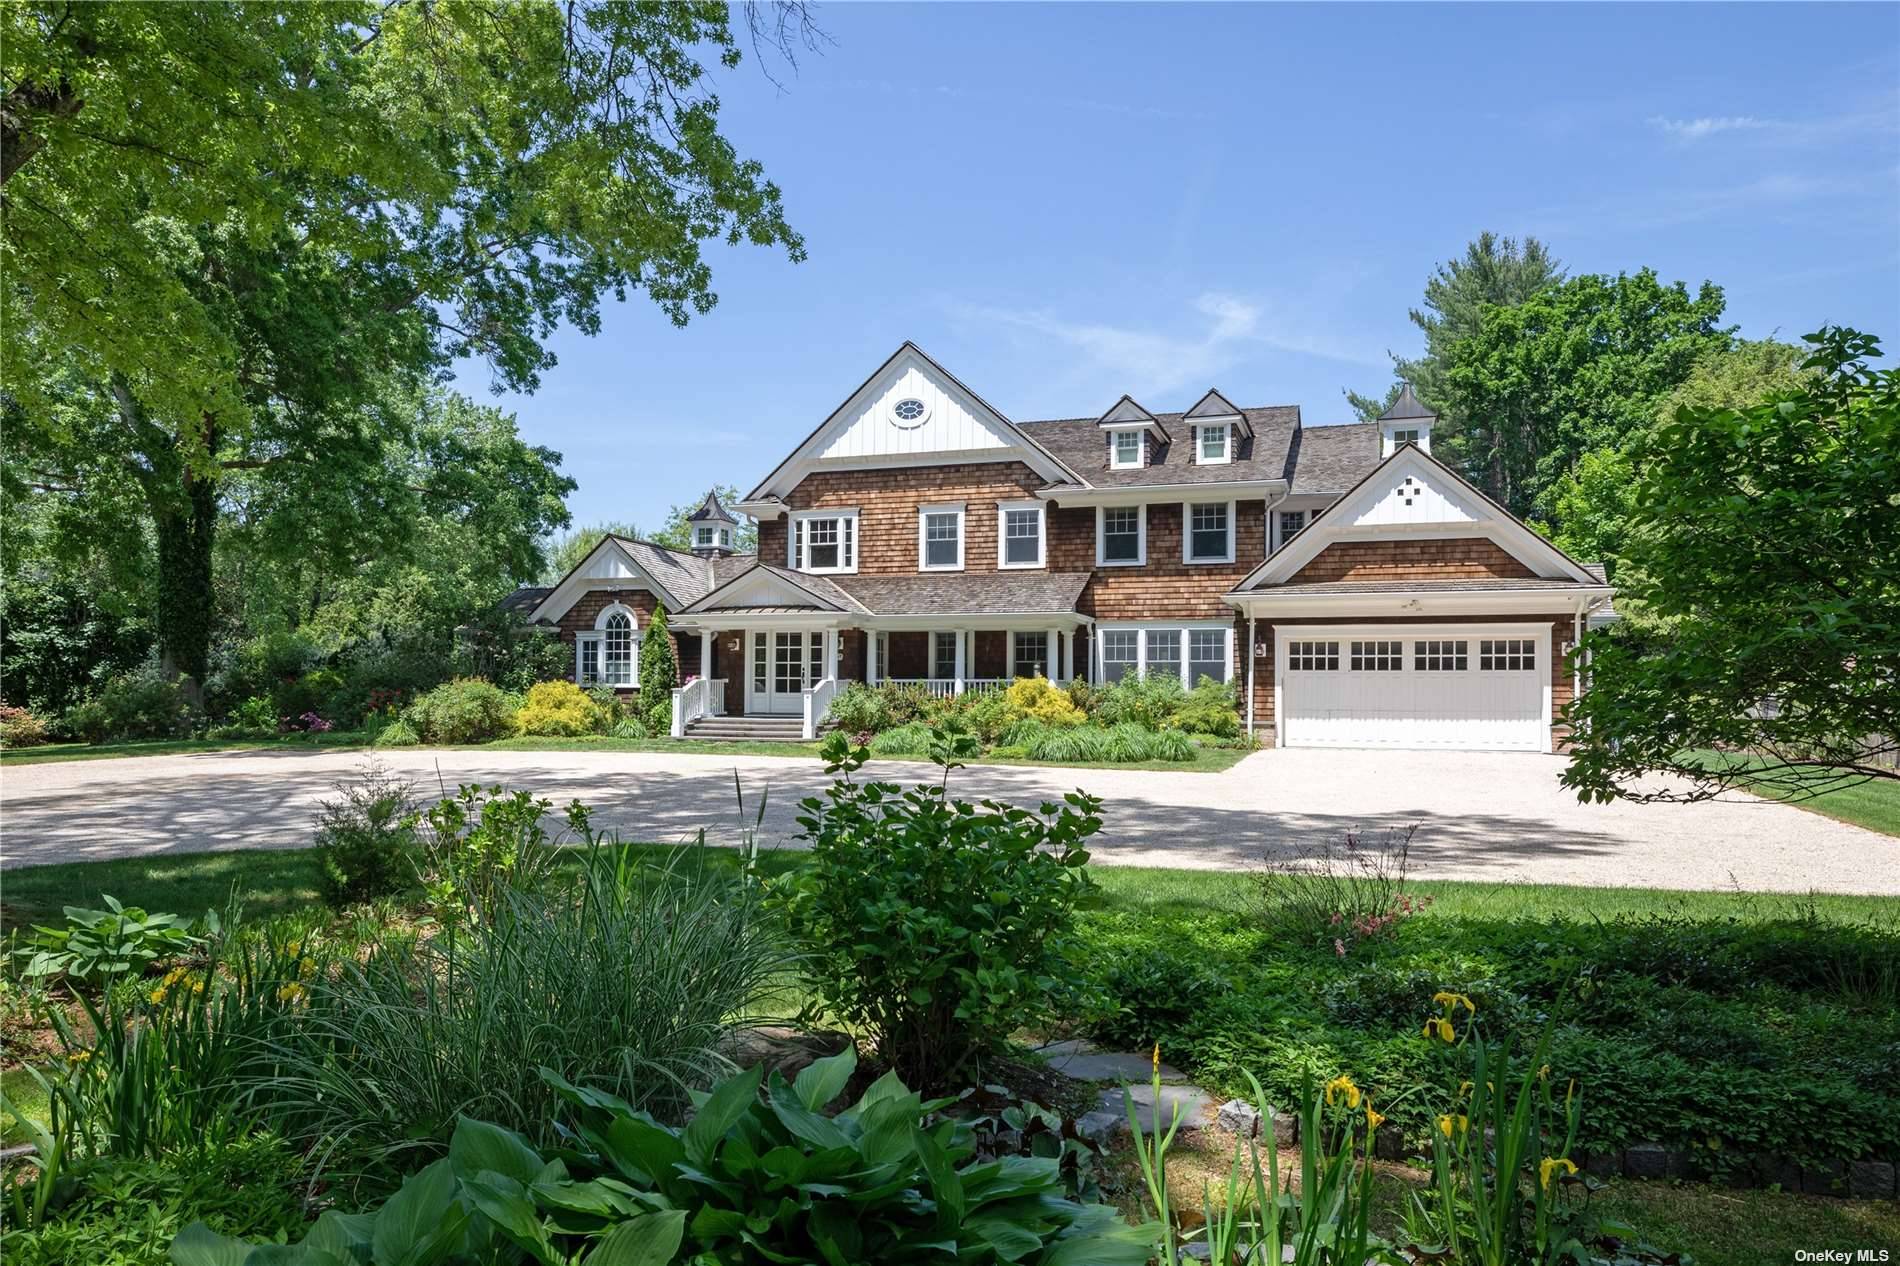 Stunning Hamptons style shingle home in the heart of the North Shore.